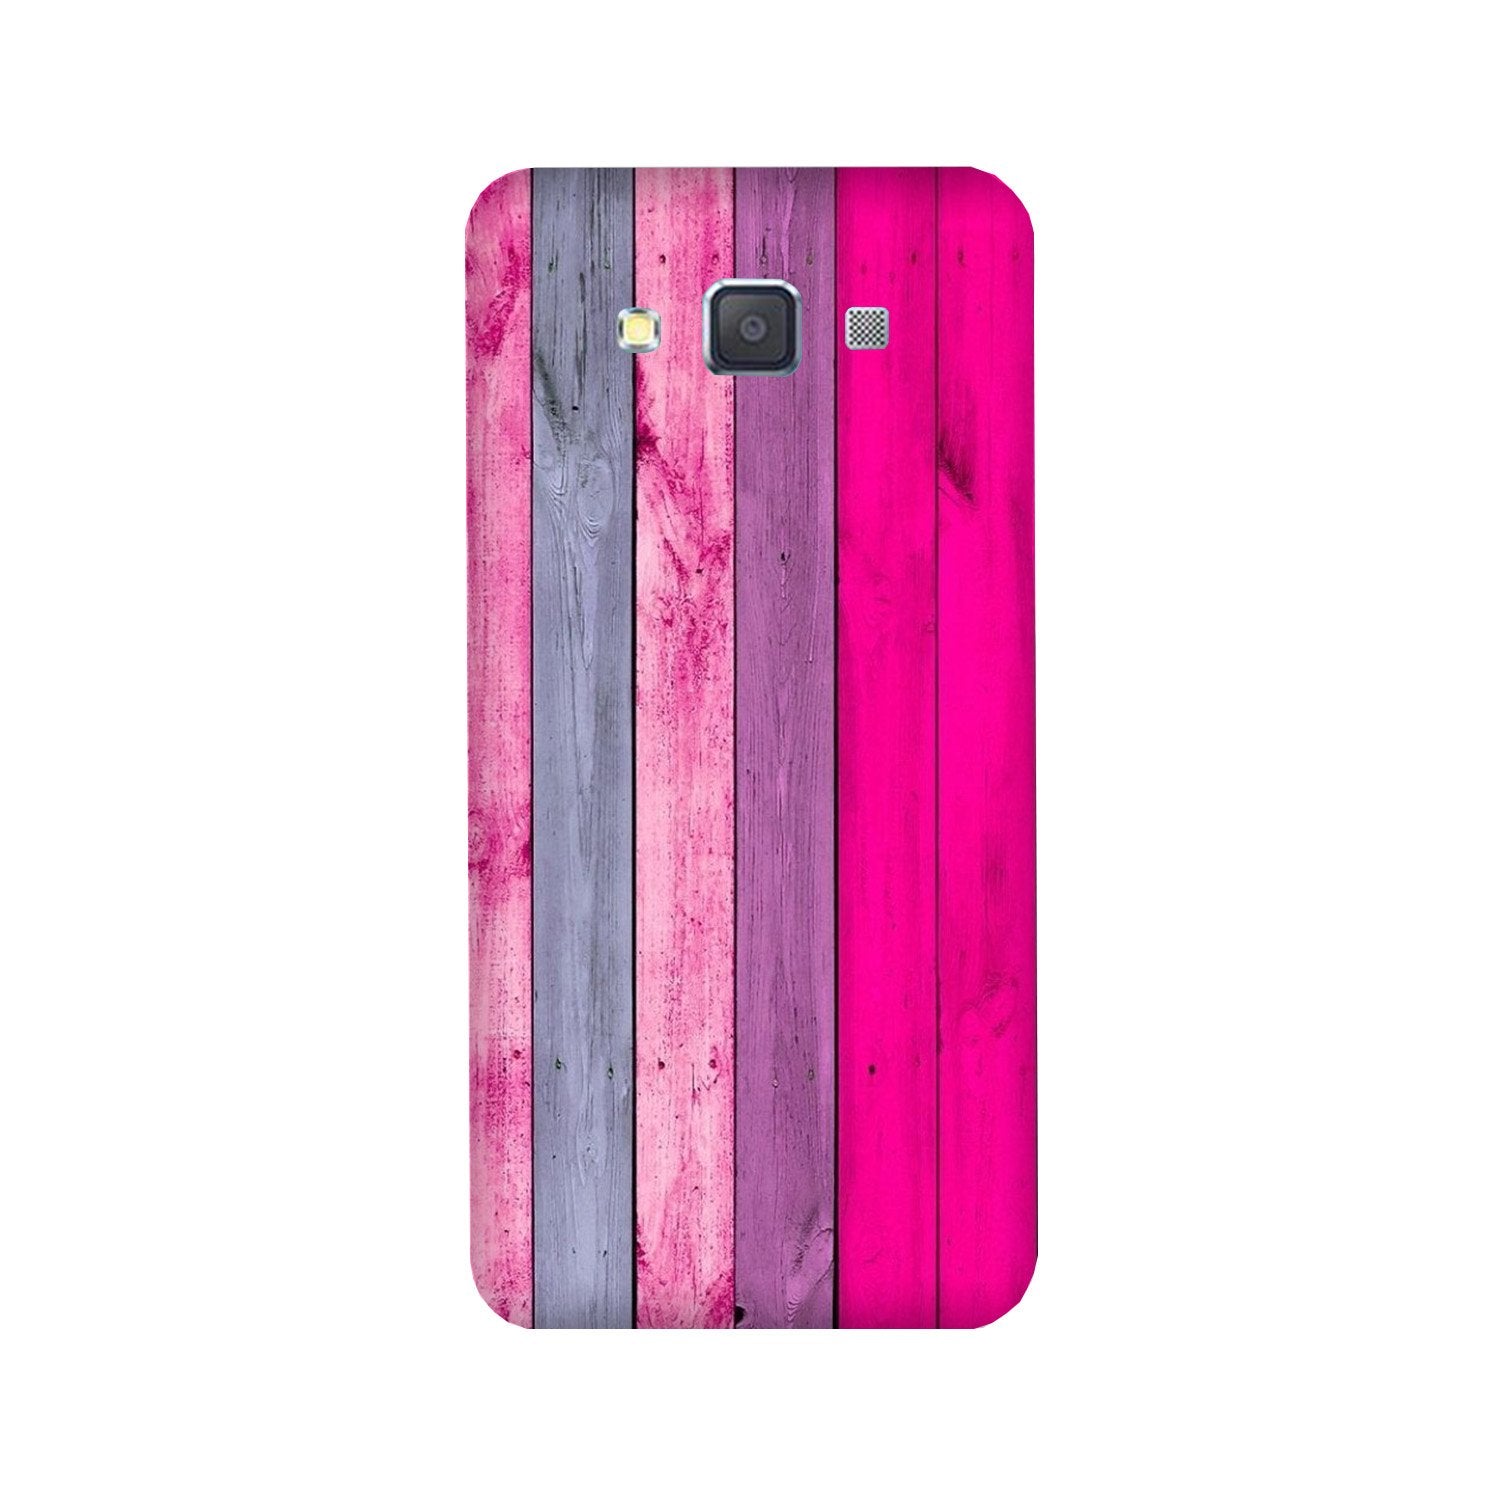 Wooden look Case for Galaxy ON7/ON7 Pro